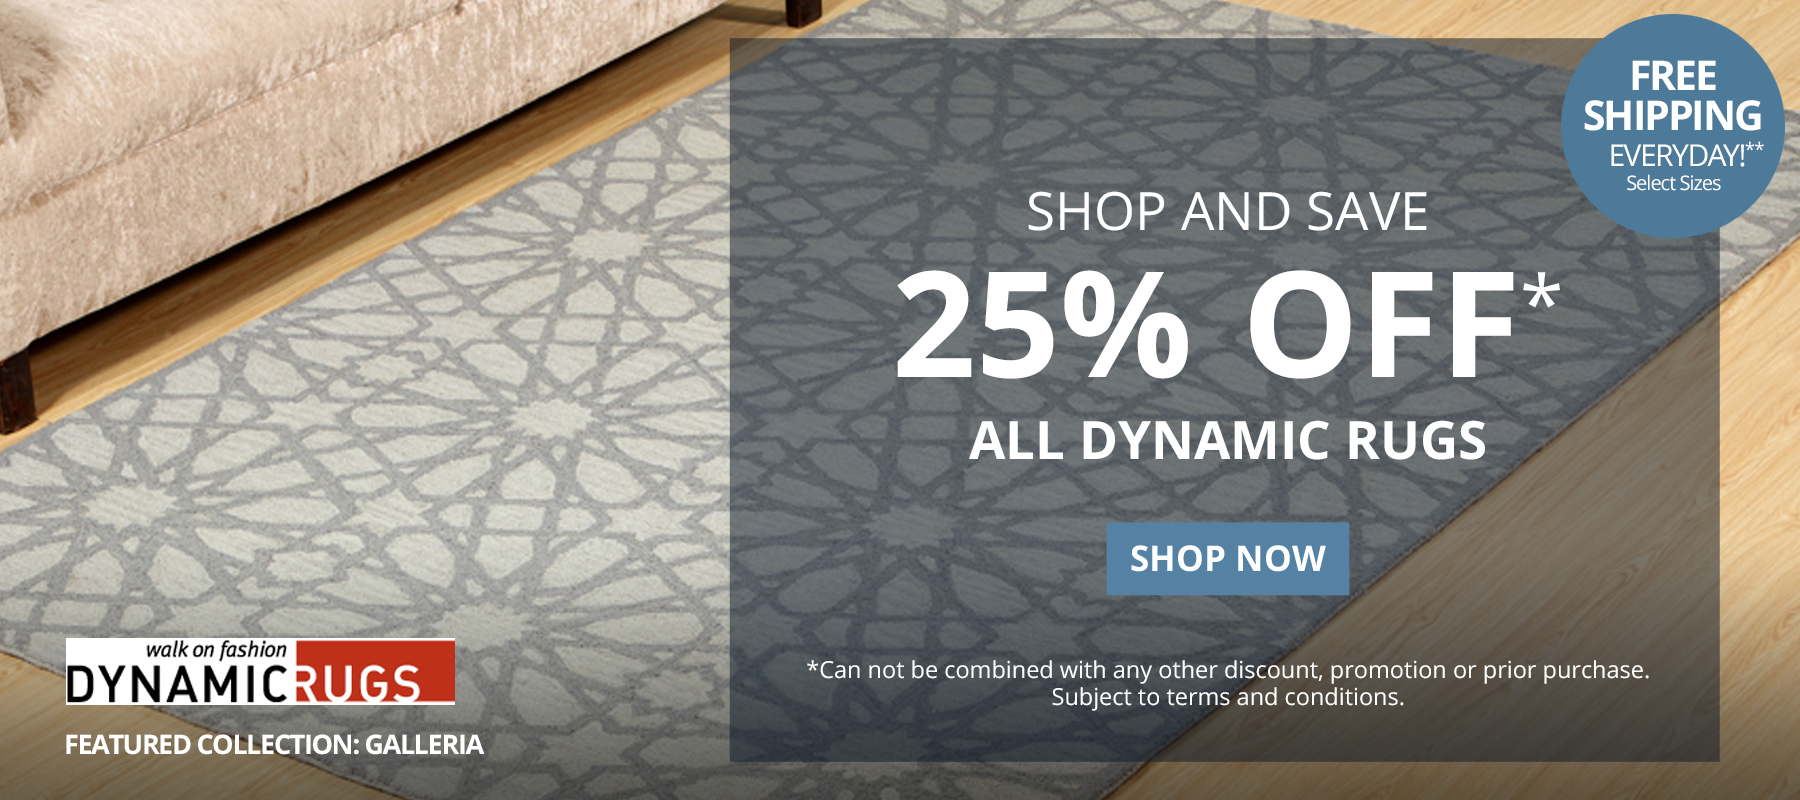 Shop and Save 25% Off* All Dynamic Rugs. Free Shipping Everyday!** Select Sizes. *Can not be combined with any other discount, promotion or prior purchase. Subject to terms and conditions. Shop Now.